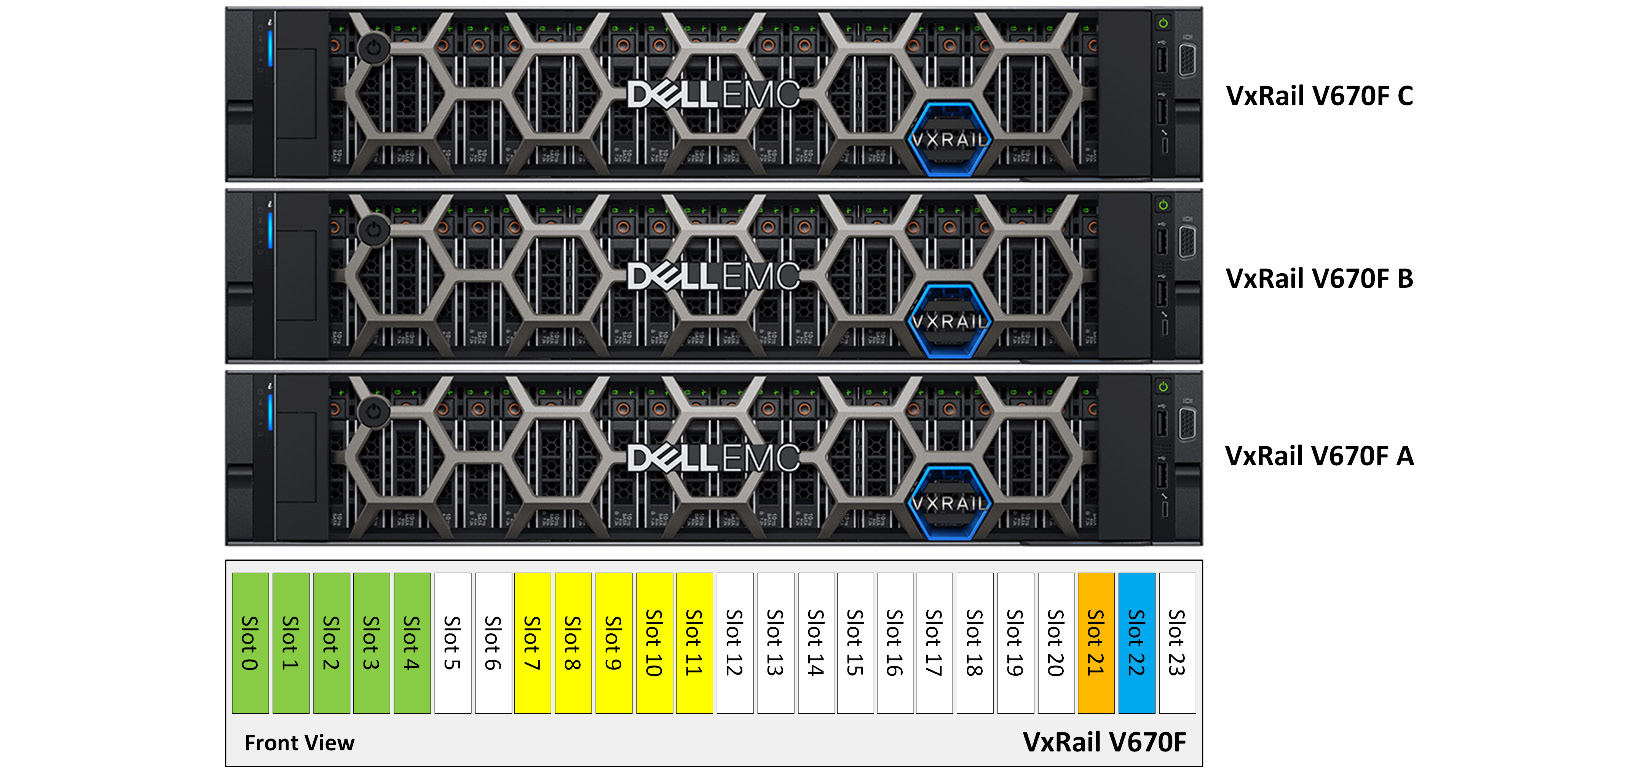 Figure 5.17 – Supported disk group configuration in VxRail V670F
